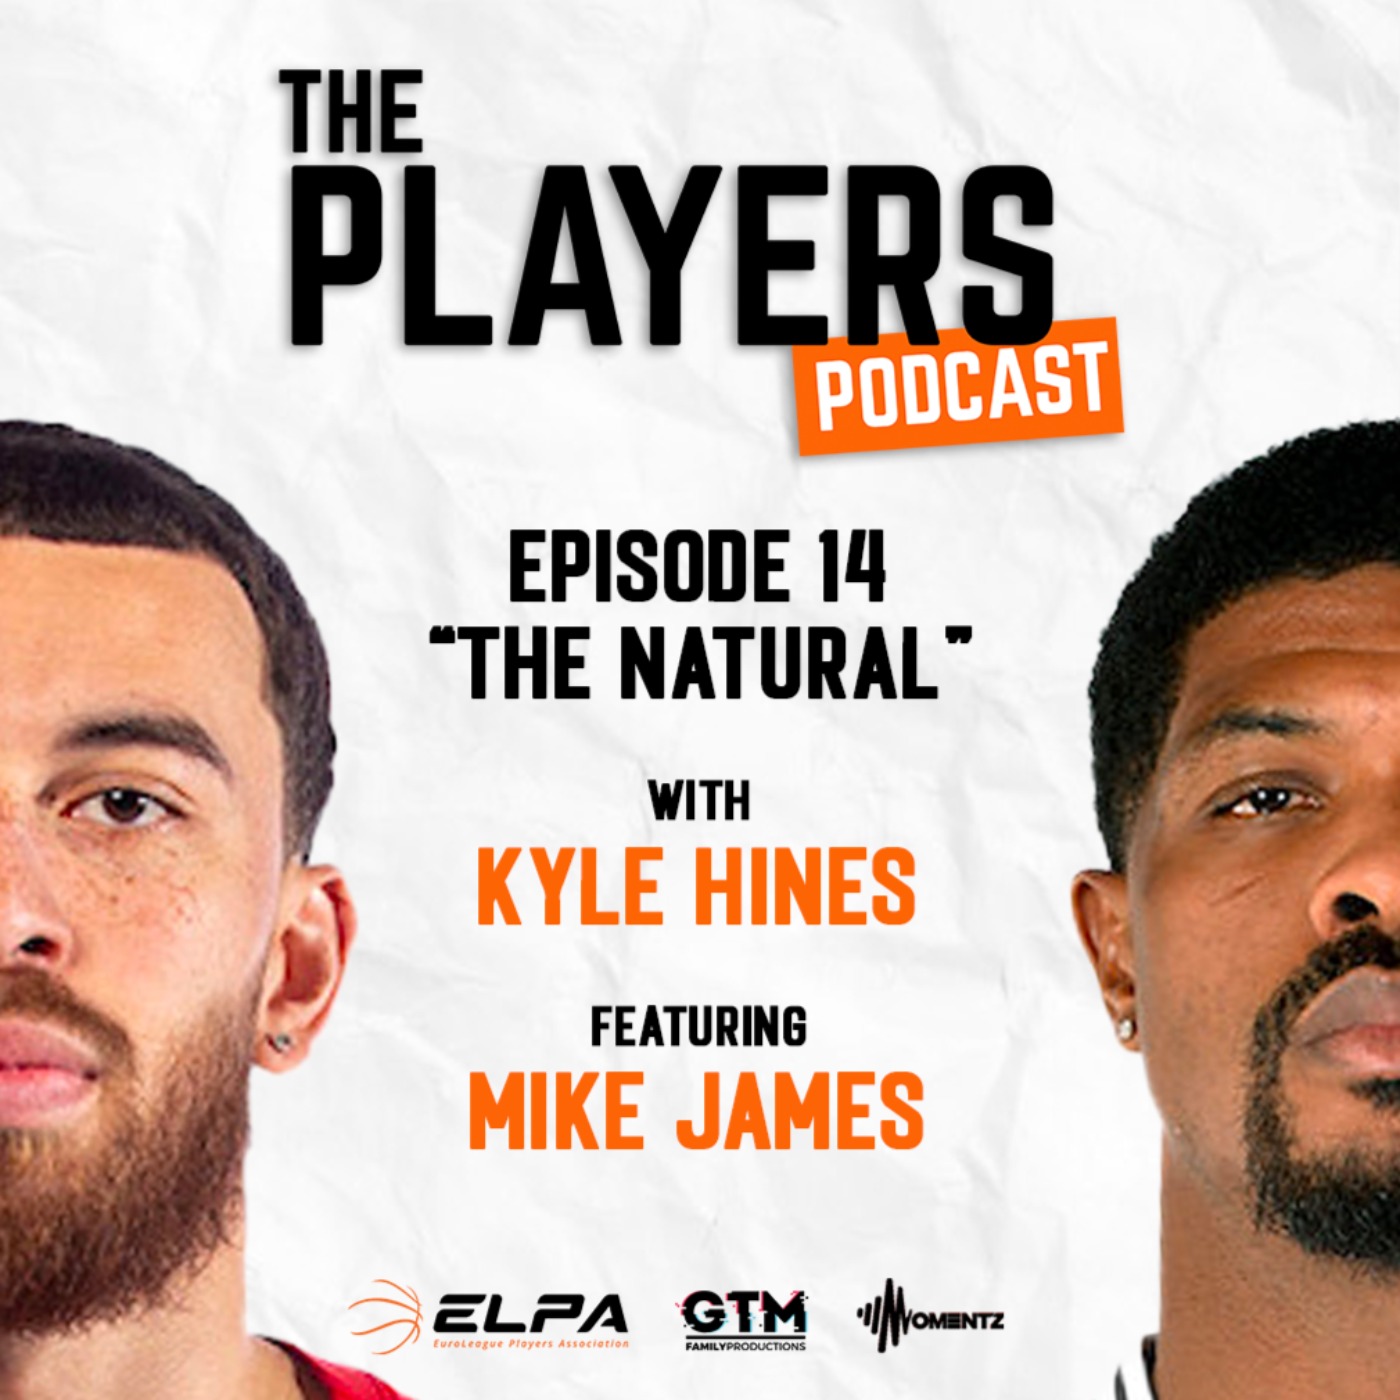 Mike James - The Natural